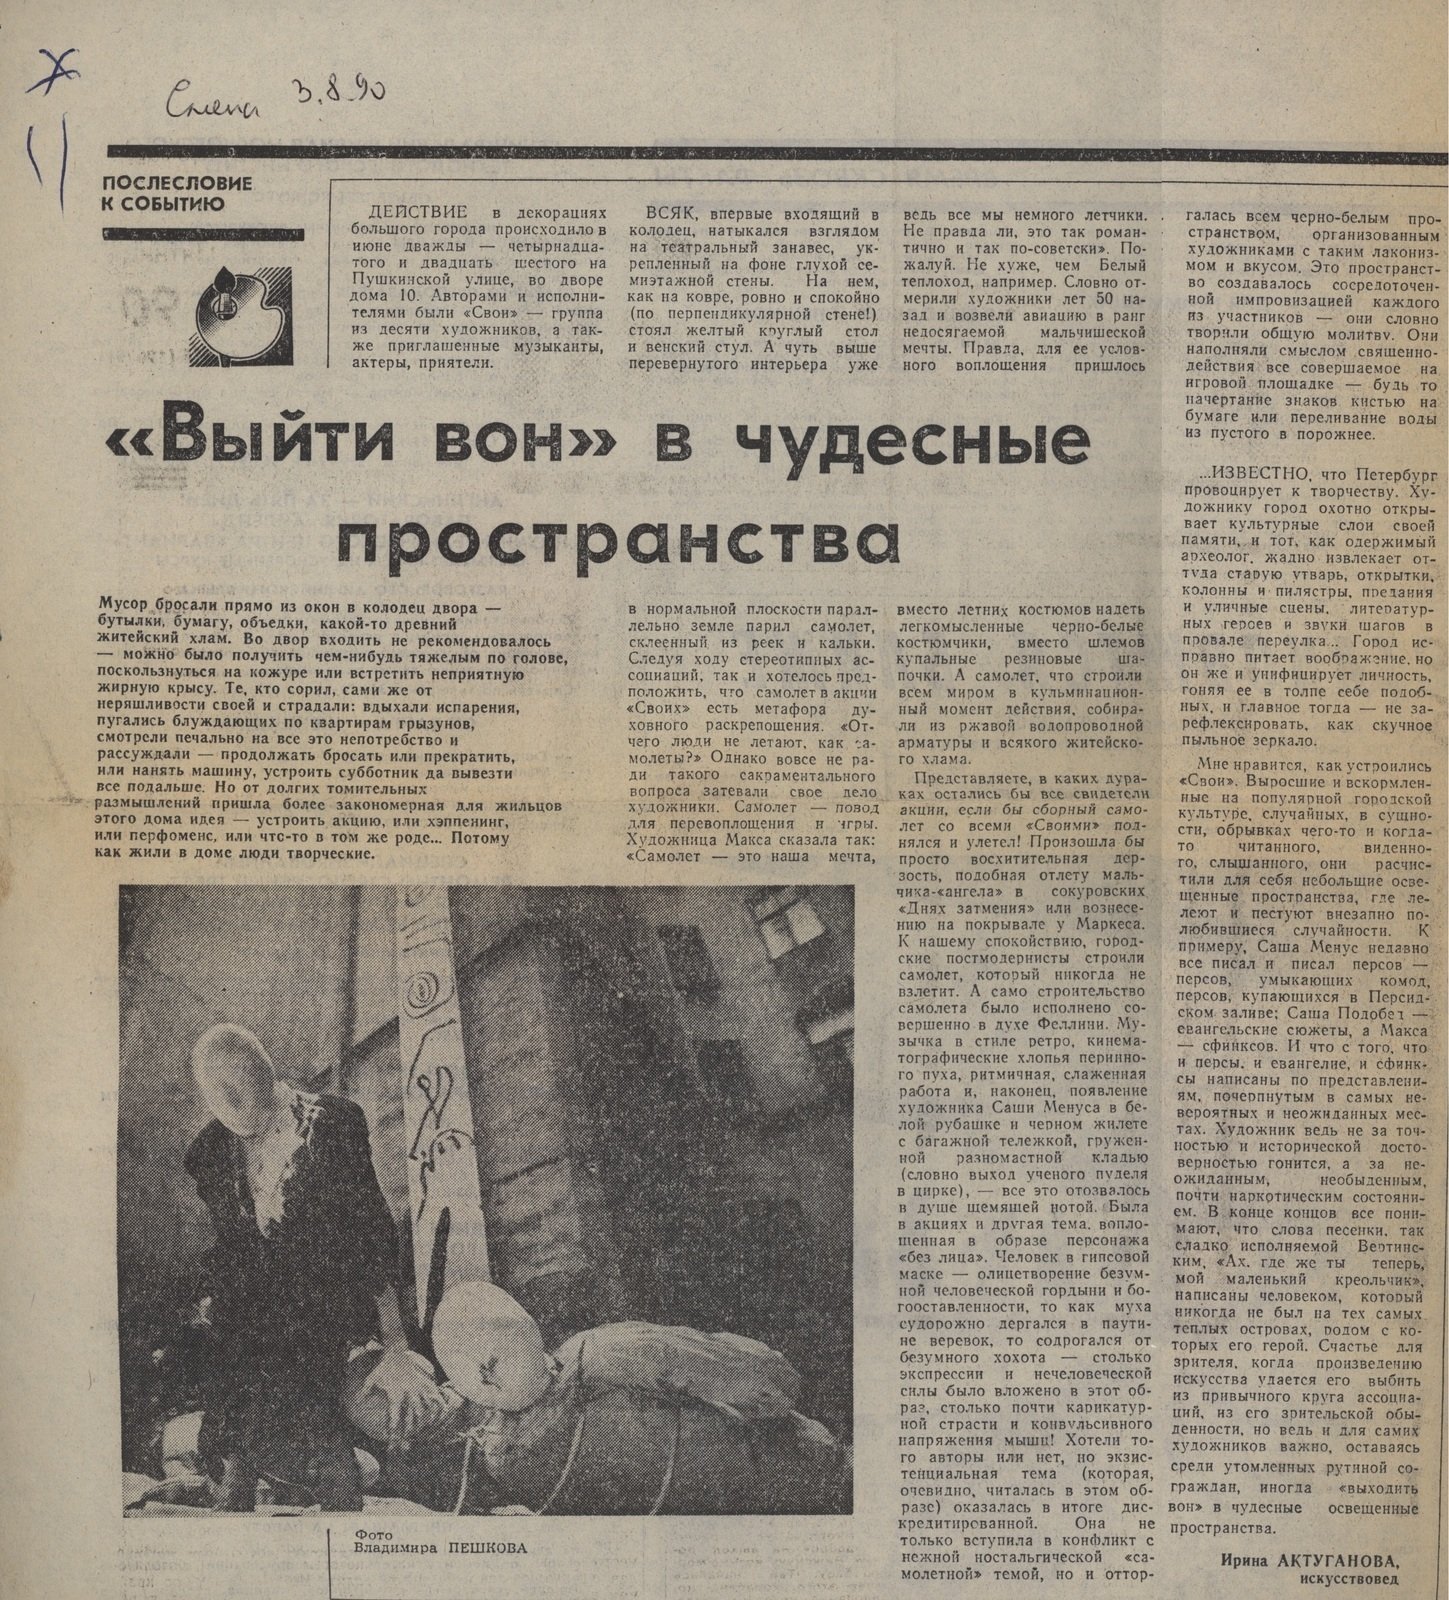 Irina Aktuganov&rsquo;s article &ldquo;&lsquo;Get out&rsquo; into Wonderful Places&rdquo;, published in the newspaper Smena, 1990 Garage Archive Collection (Lyubov Gurevich archive)